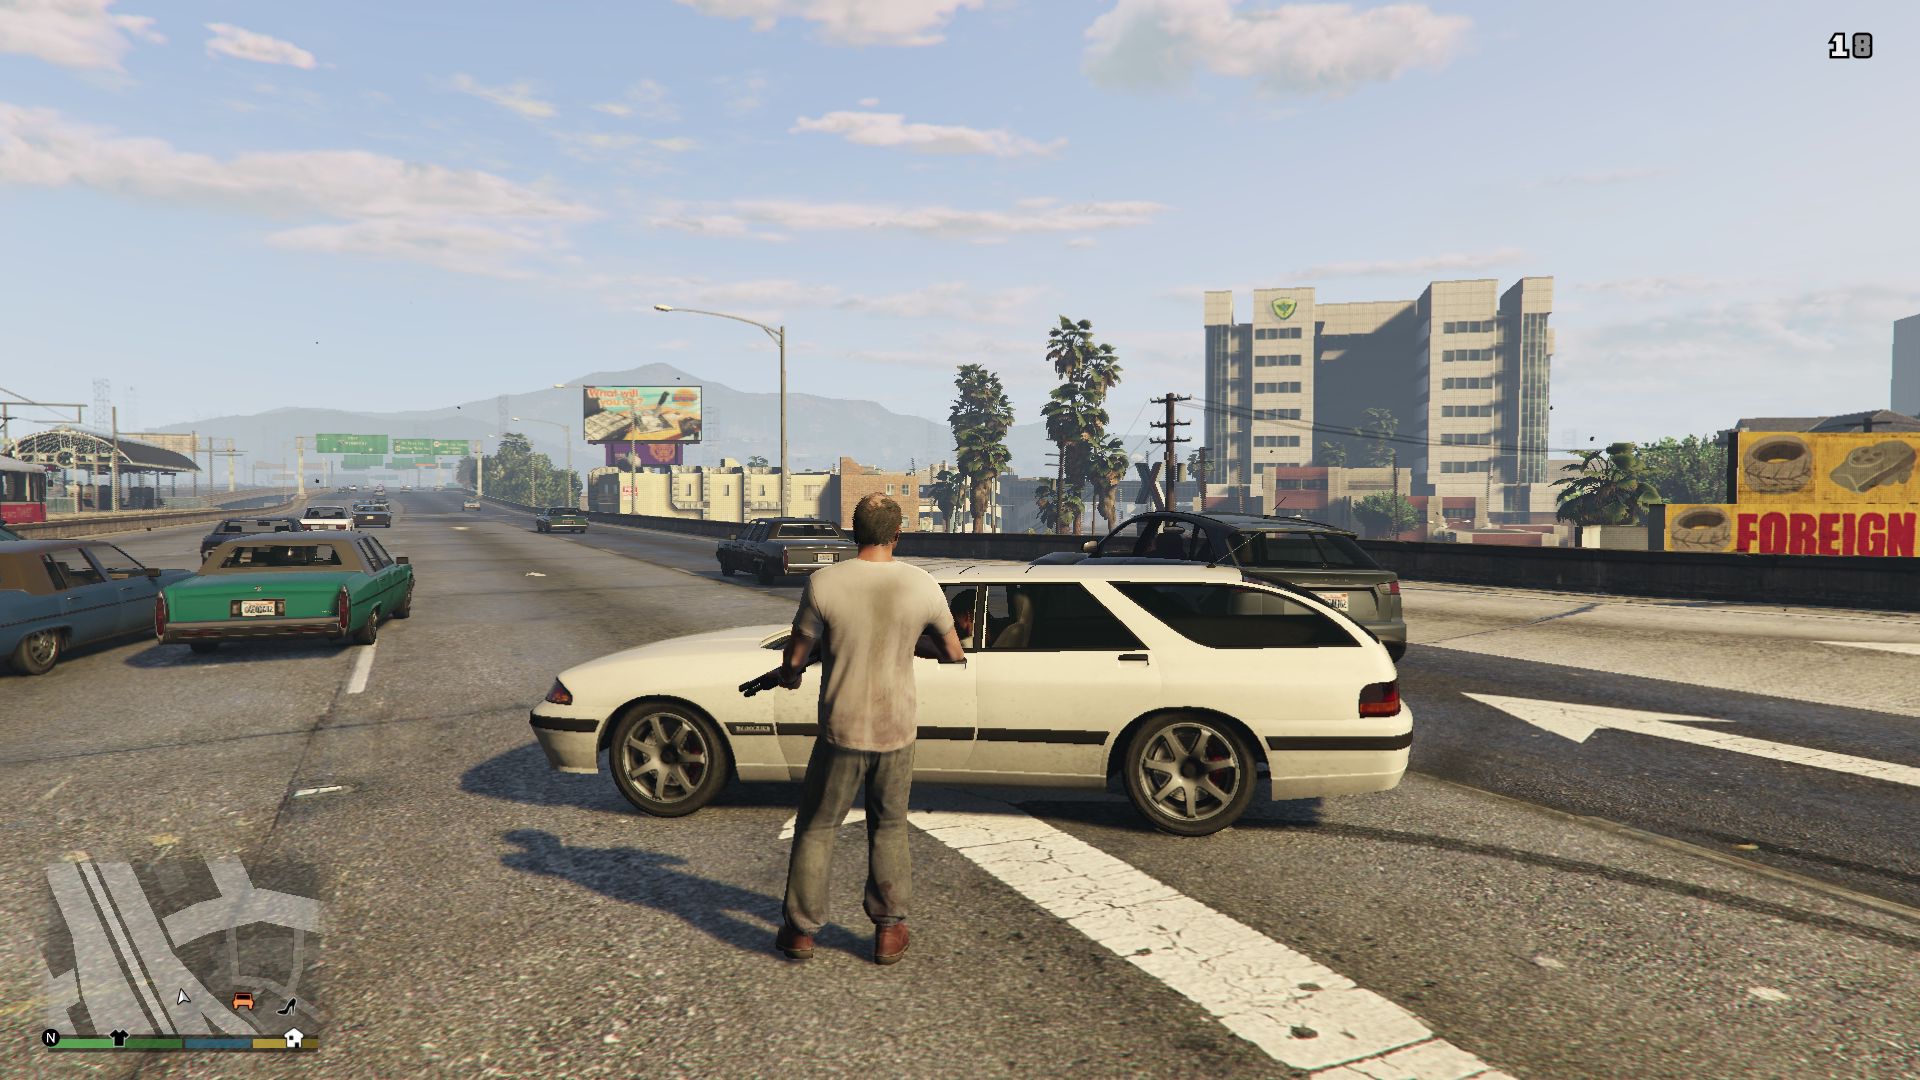 How To Download Gta 5 Full Version For Mac